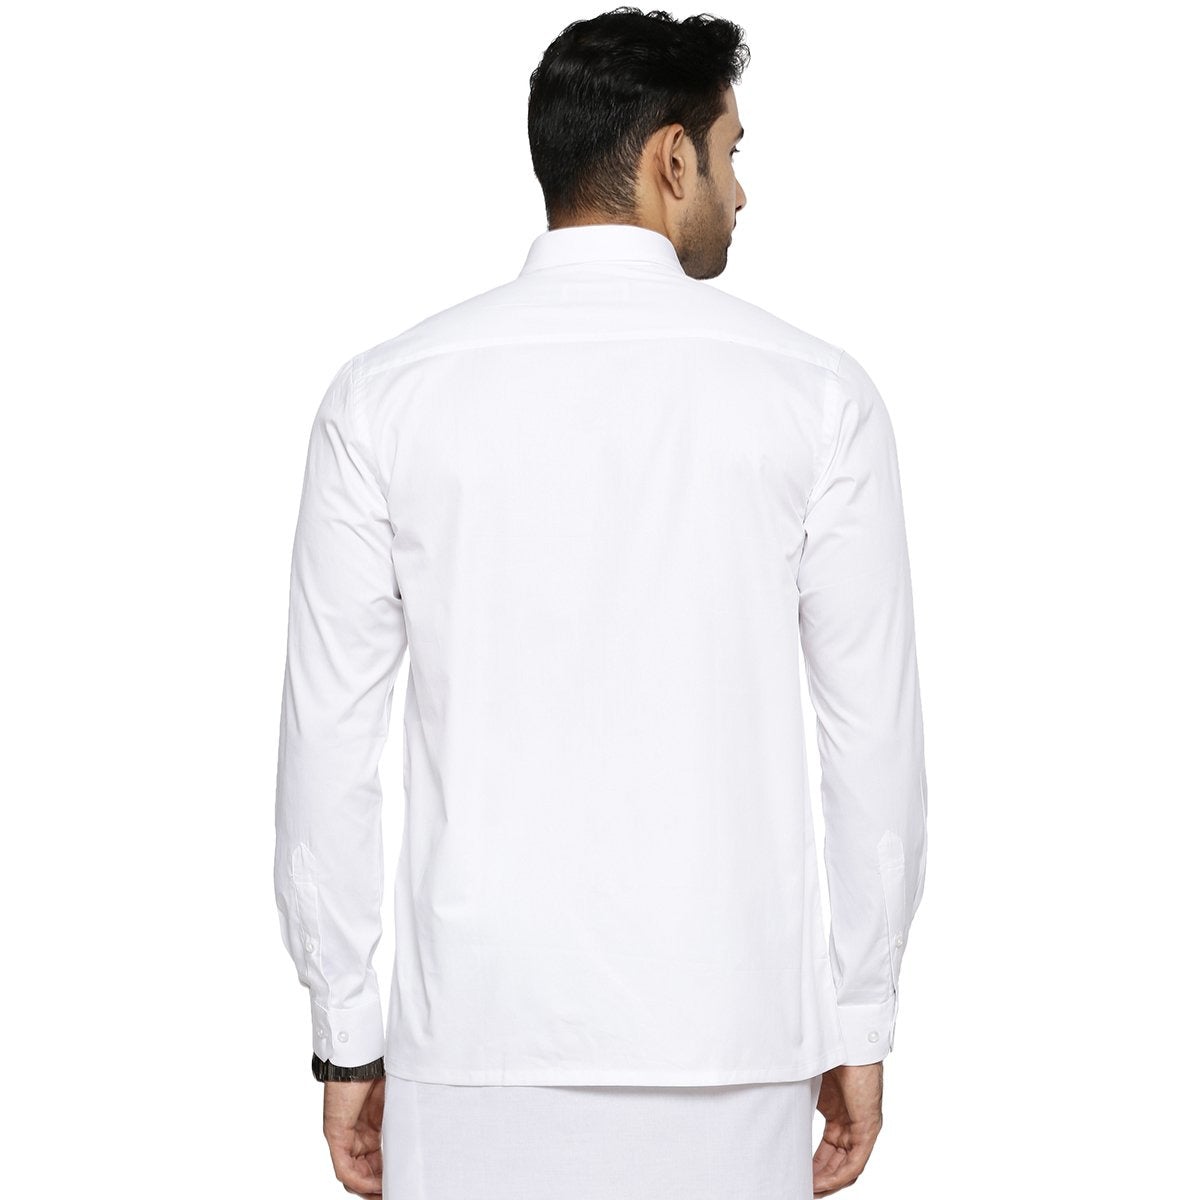 Mens 100% Cotton Full Sleeves White Shirt Super Faast -Back view